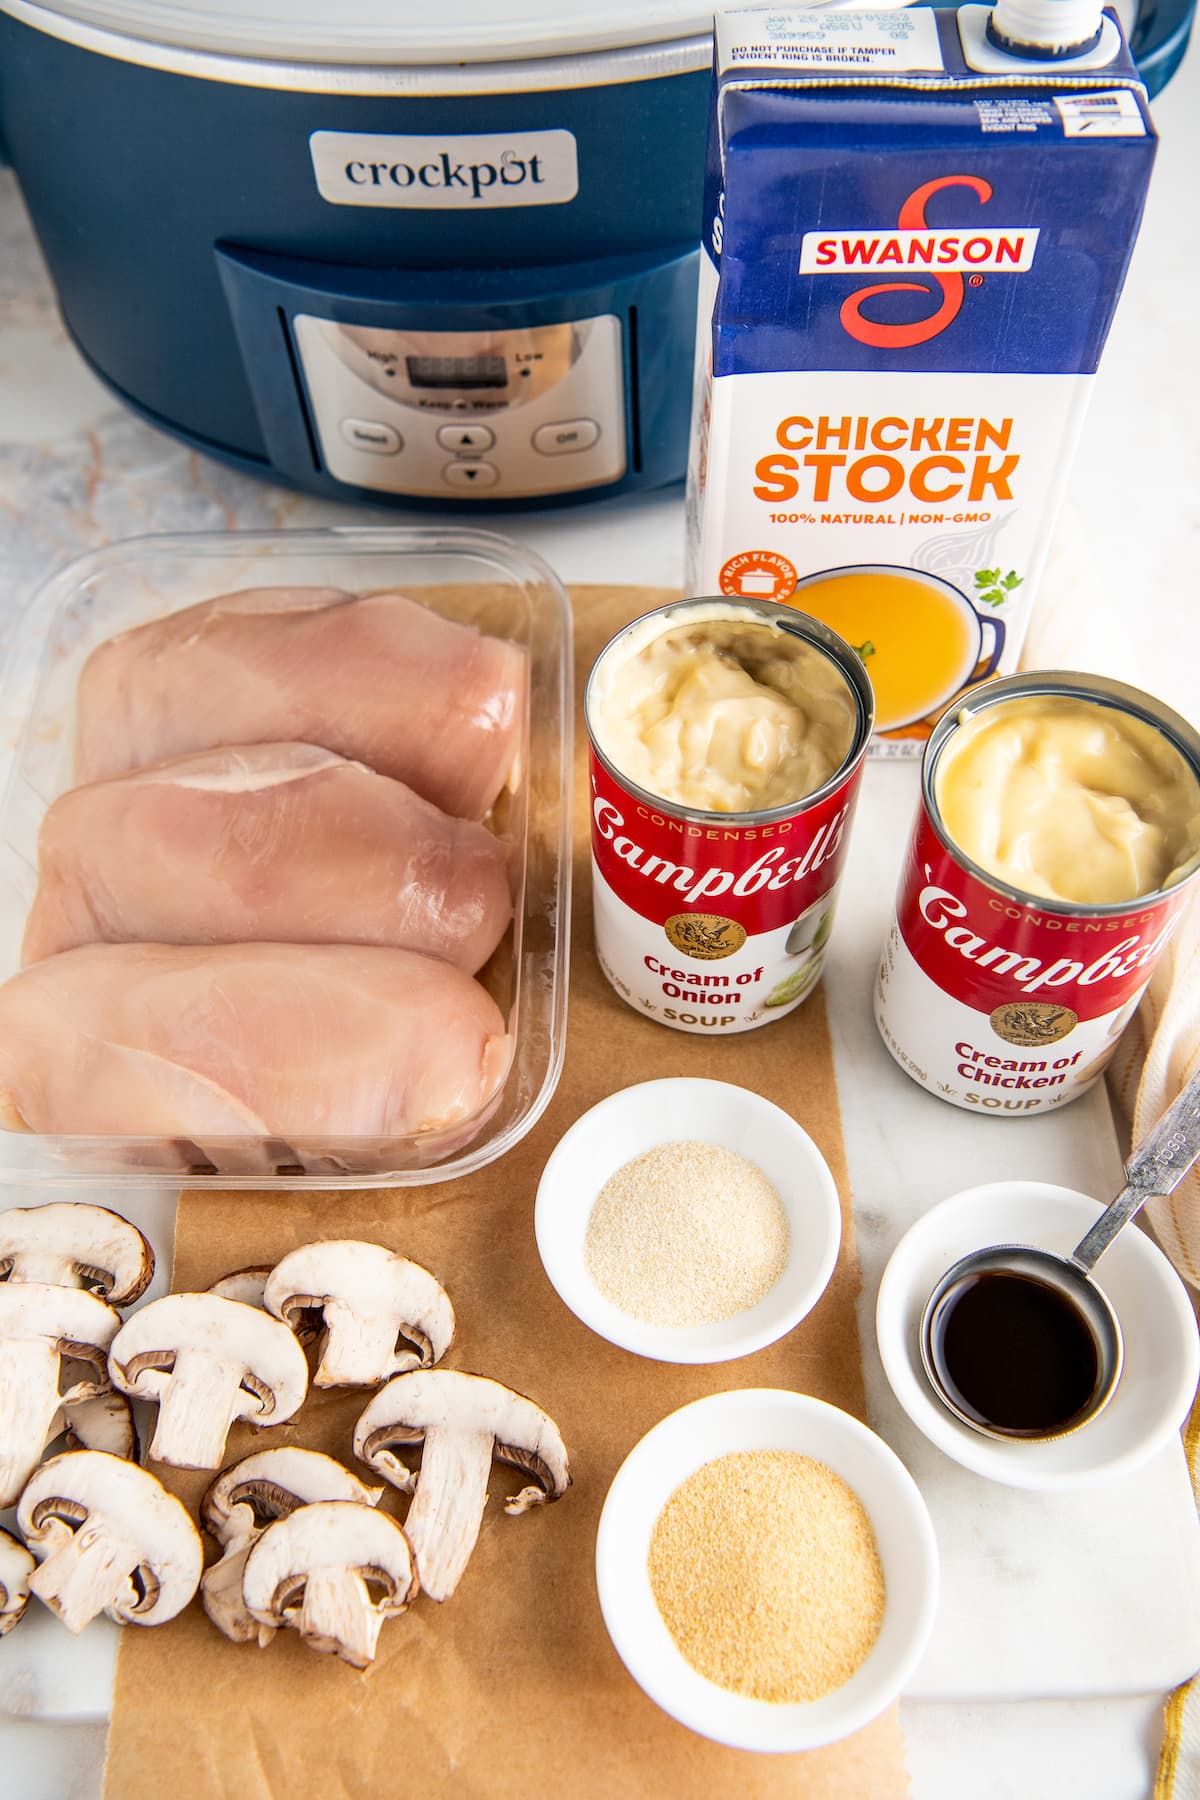 The ingredients needed for Crockpot Chicken & Gravy: sliced mushrooms, raw chicken breasts, a can of cream of chicken soup, a can of cream of onion soup, a container of chicken broth, a bowl of Worcestershire sauce, a bowl of garlic powder, and a bowl of onion powder, next to a crockpot.